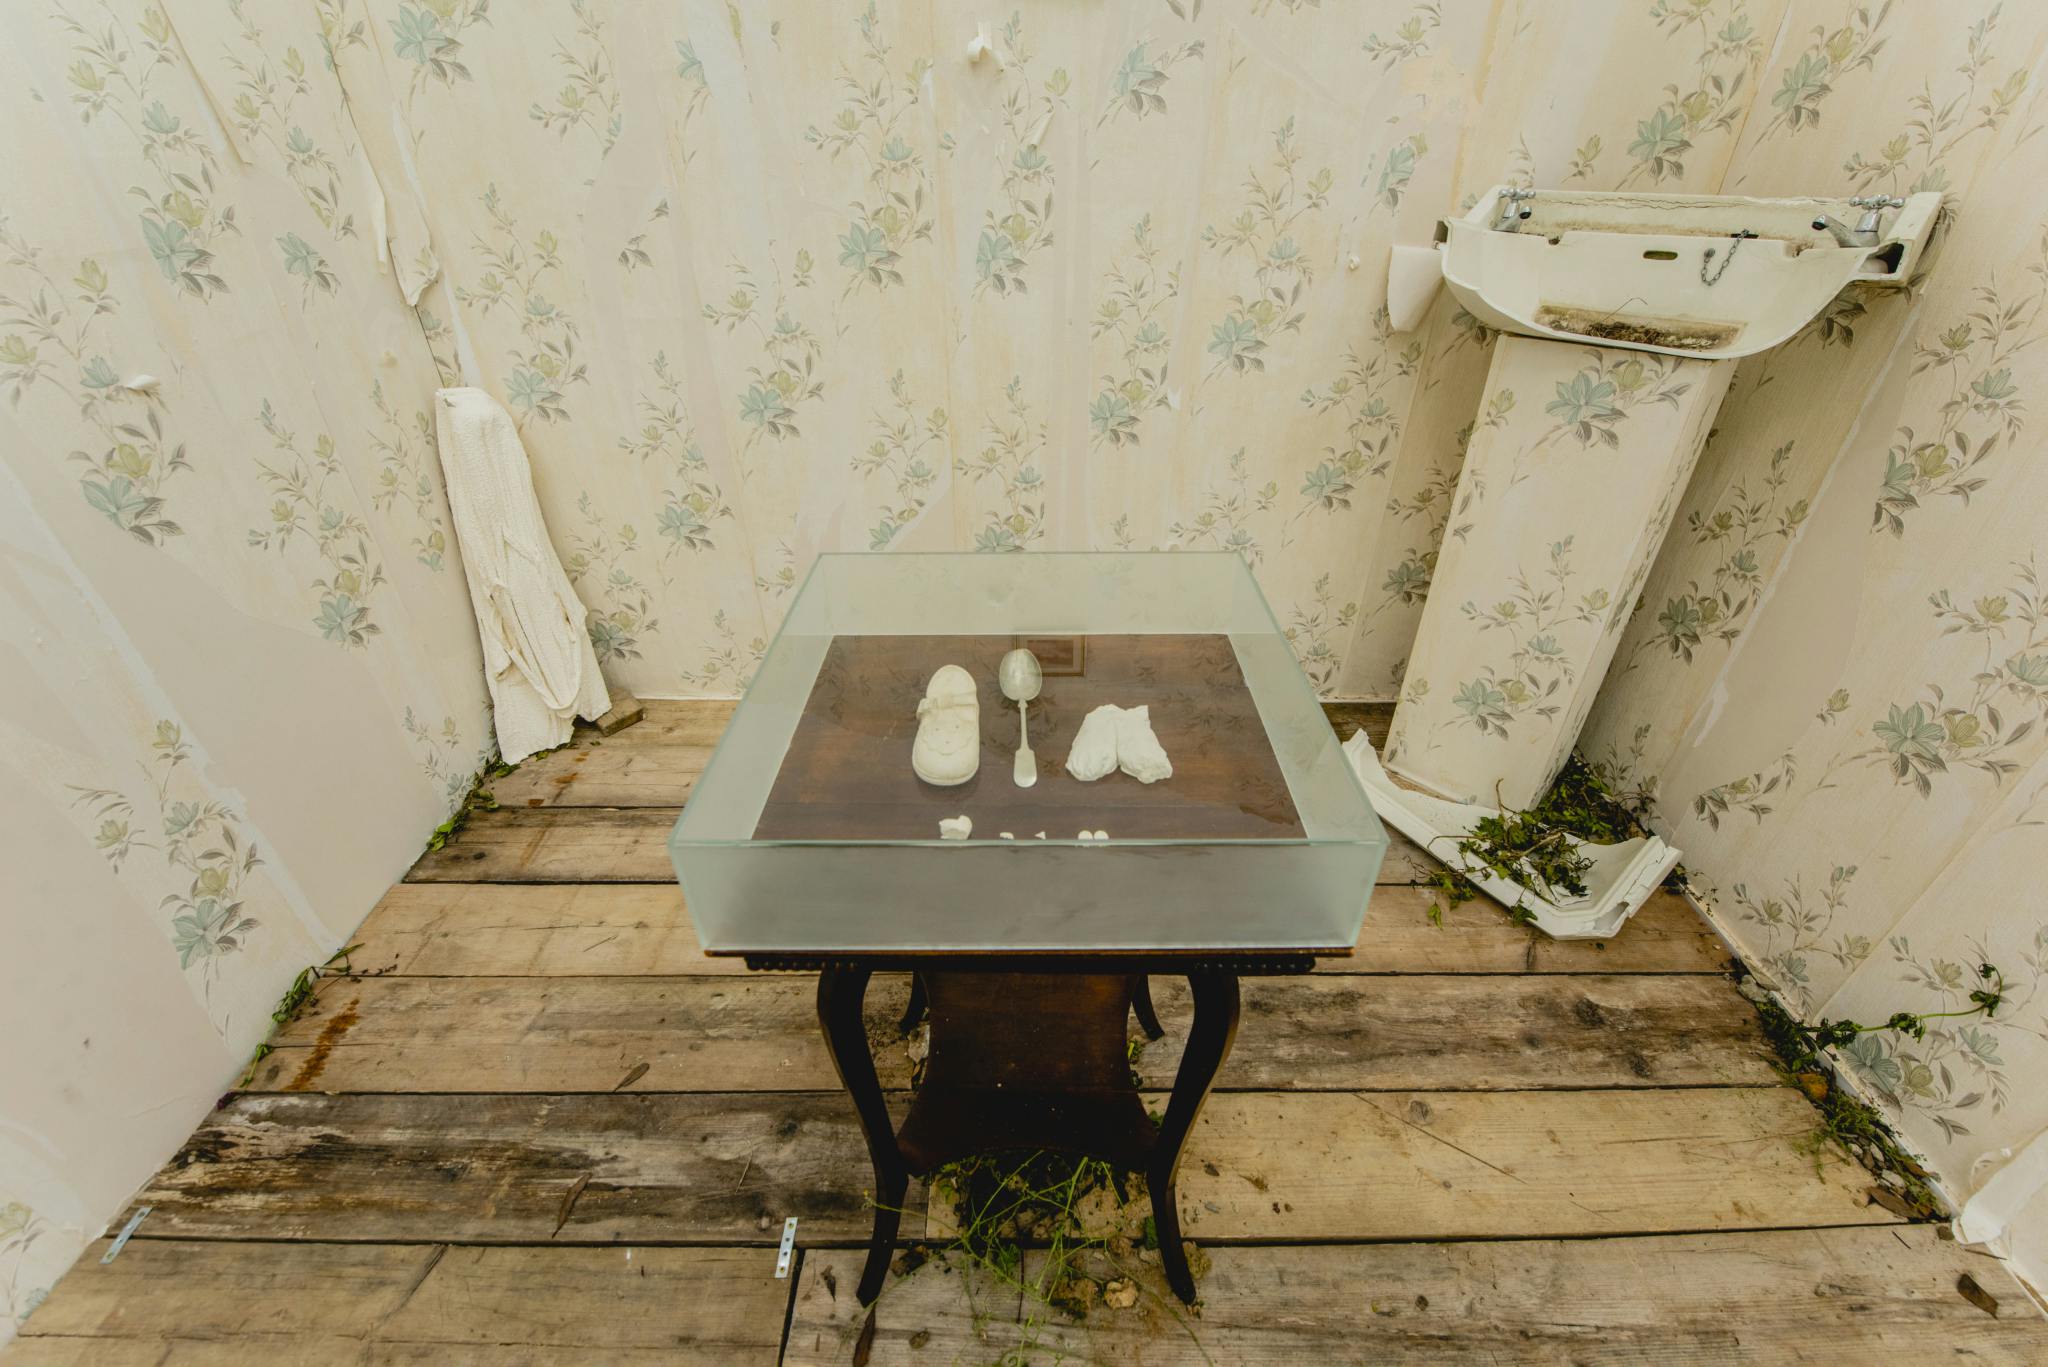 Image shows an art installation with a broken ceramic sink in the background surrounded by peeling wallpaper with a box of sentimental items in a glass box in the foreground